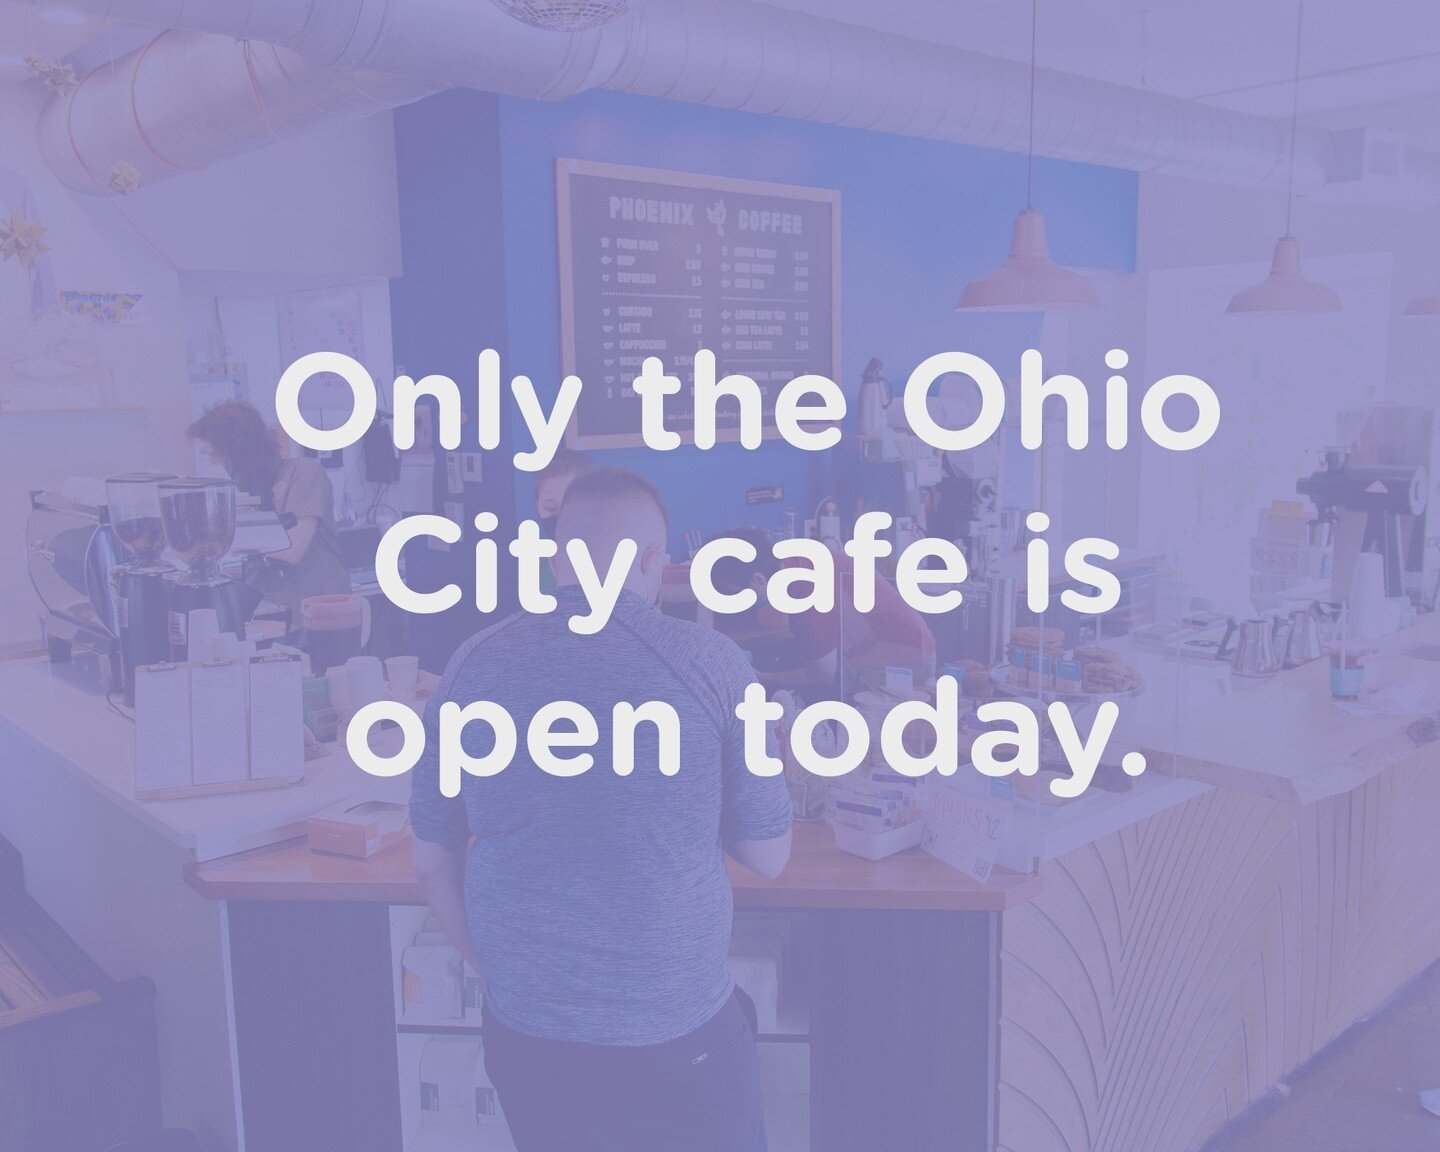 In observance of Juneteenth, we will be closed at Lee Rd., Coventry Rd., Warehouse District, and East 9th today.⁠
⁠
If you're looking for coffee, wander over to our Ohio City caf&eacute;, where they're holding it down.⁠
⁠
#phoenixcoffee #juneteenth #